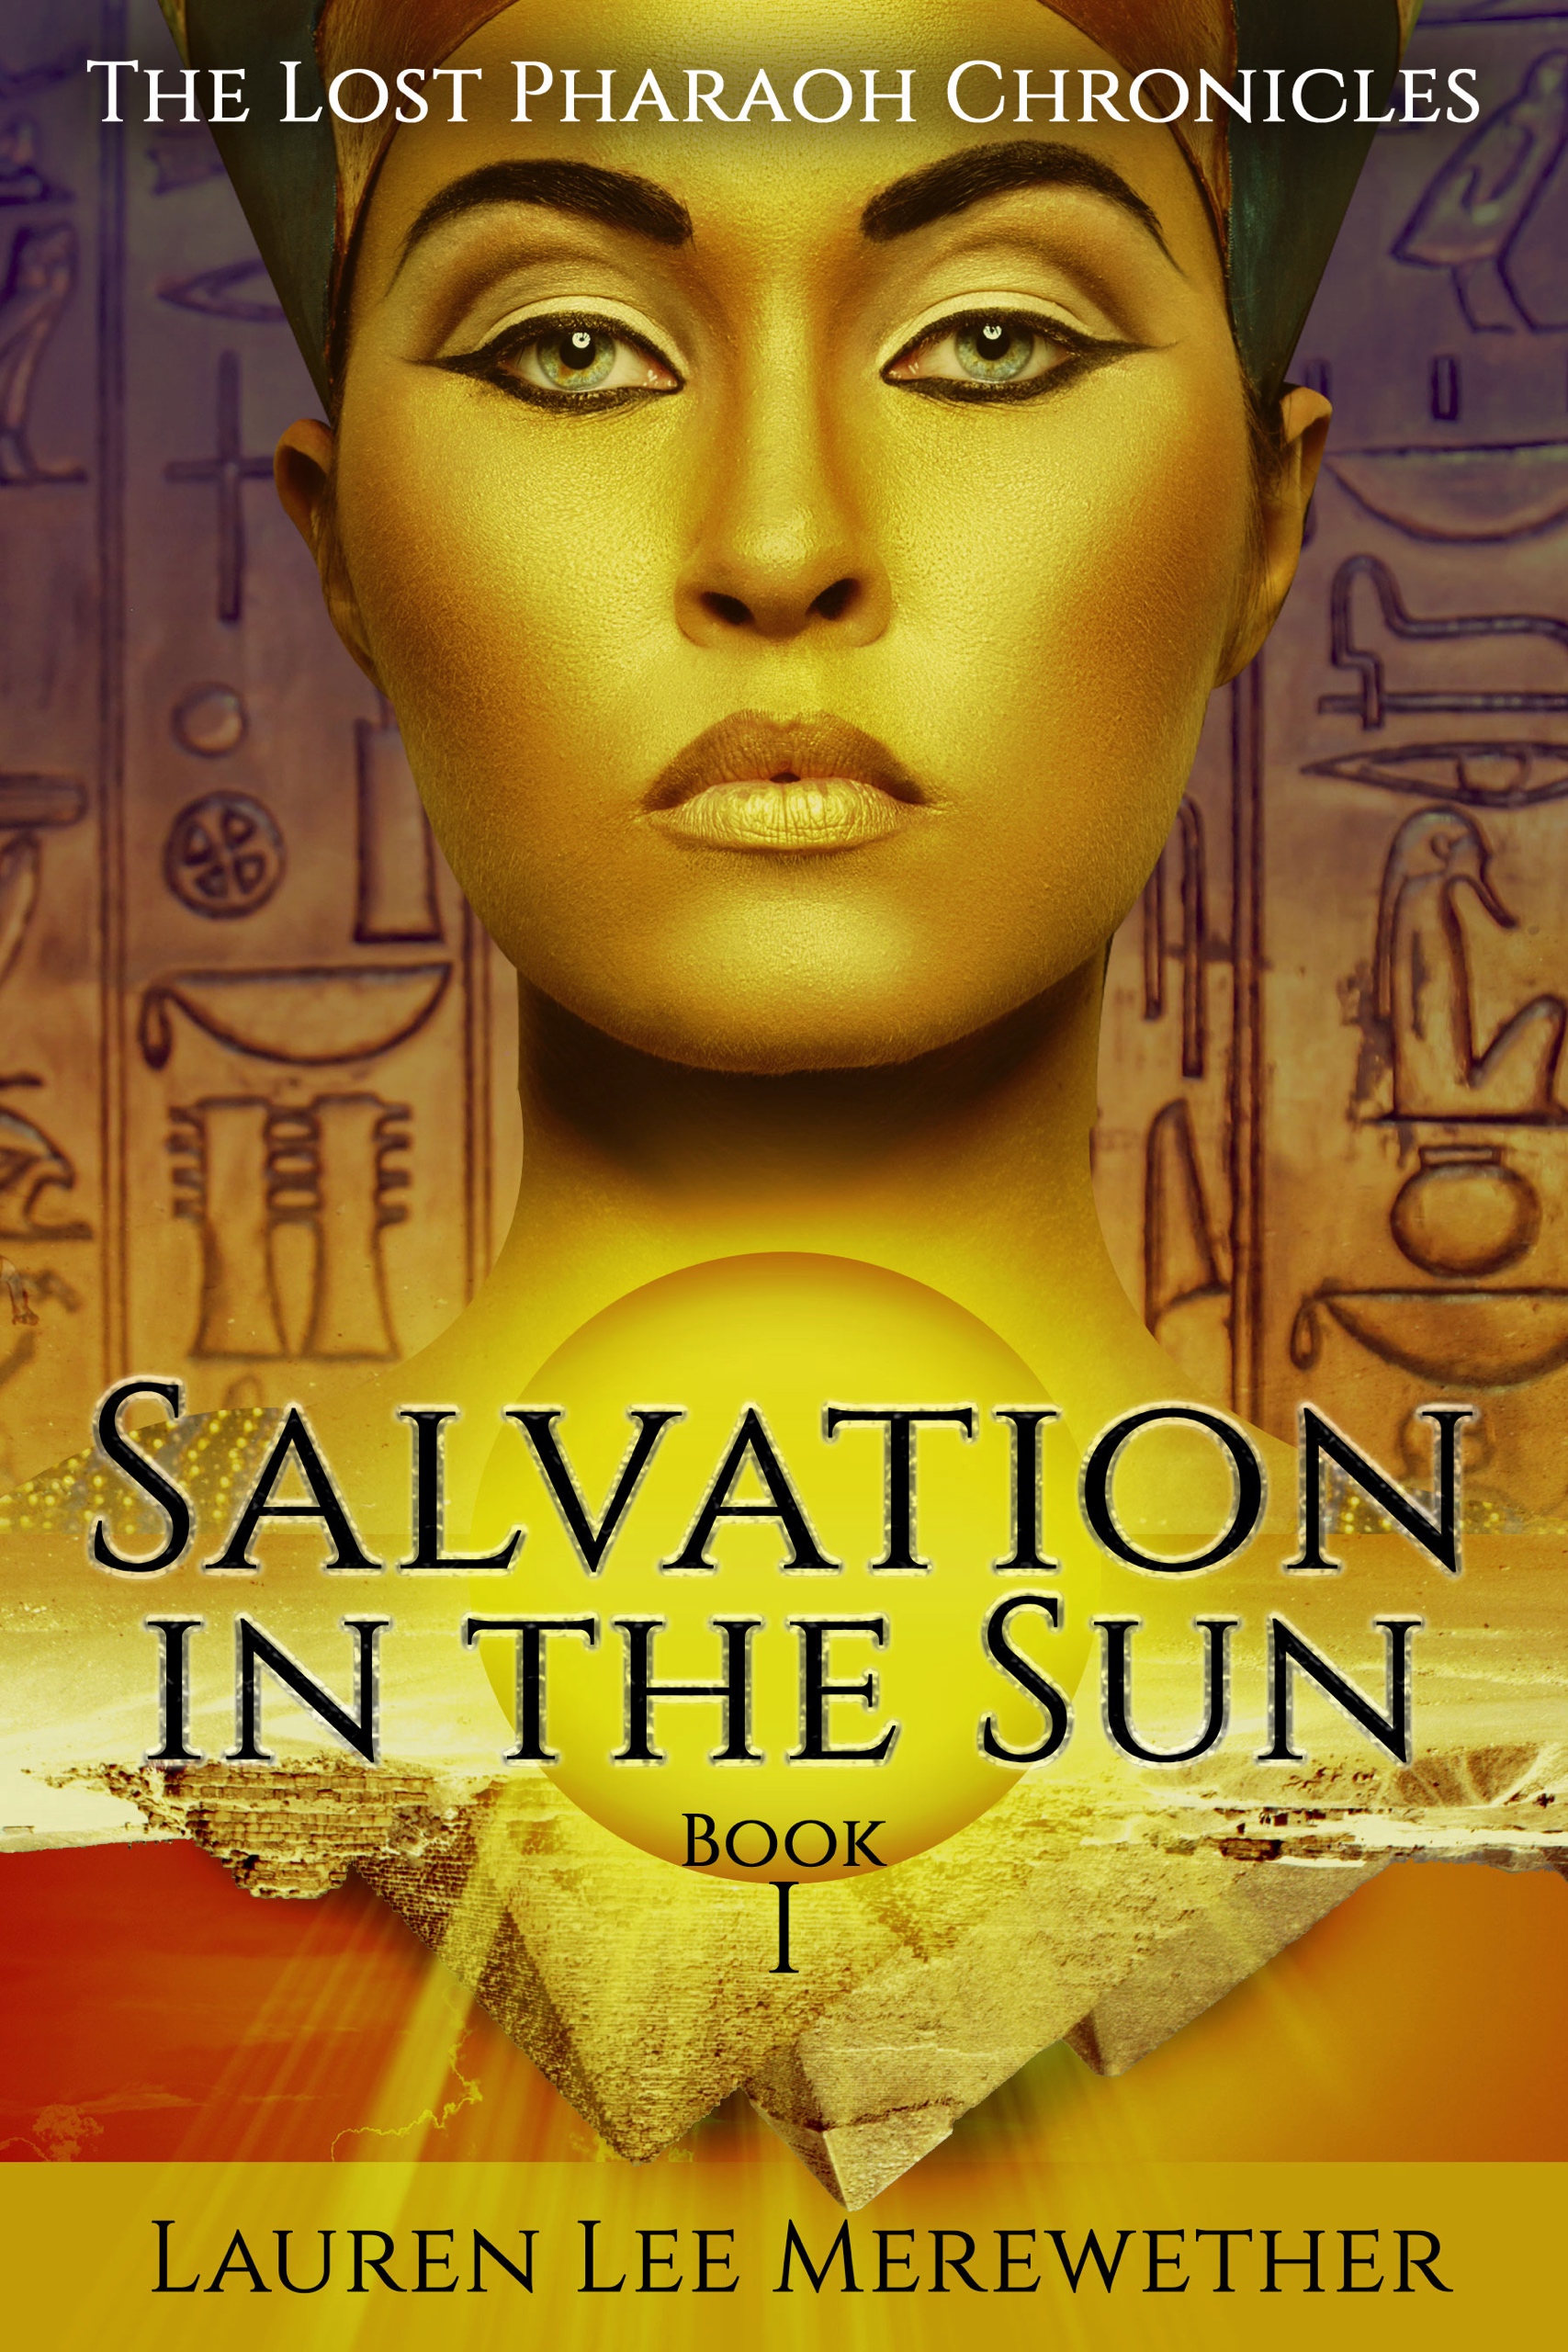 FREE: Slavation in the Sun by Lauren Lee Merewether